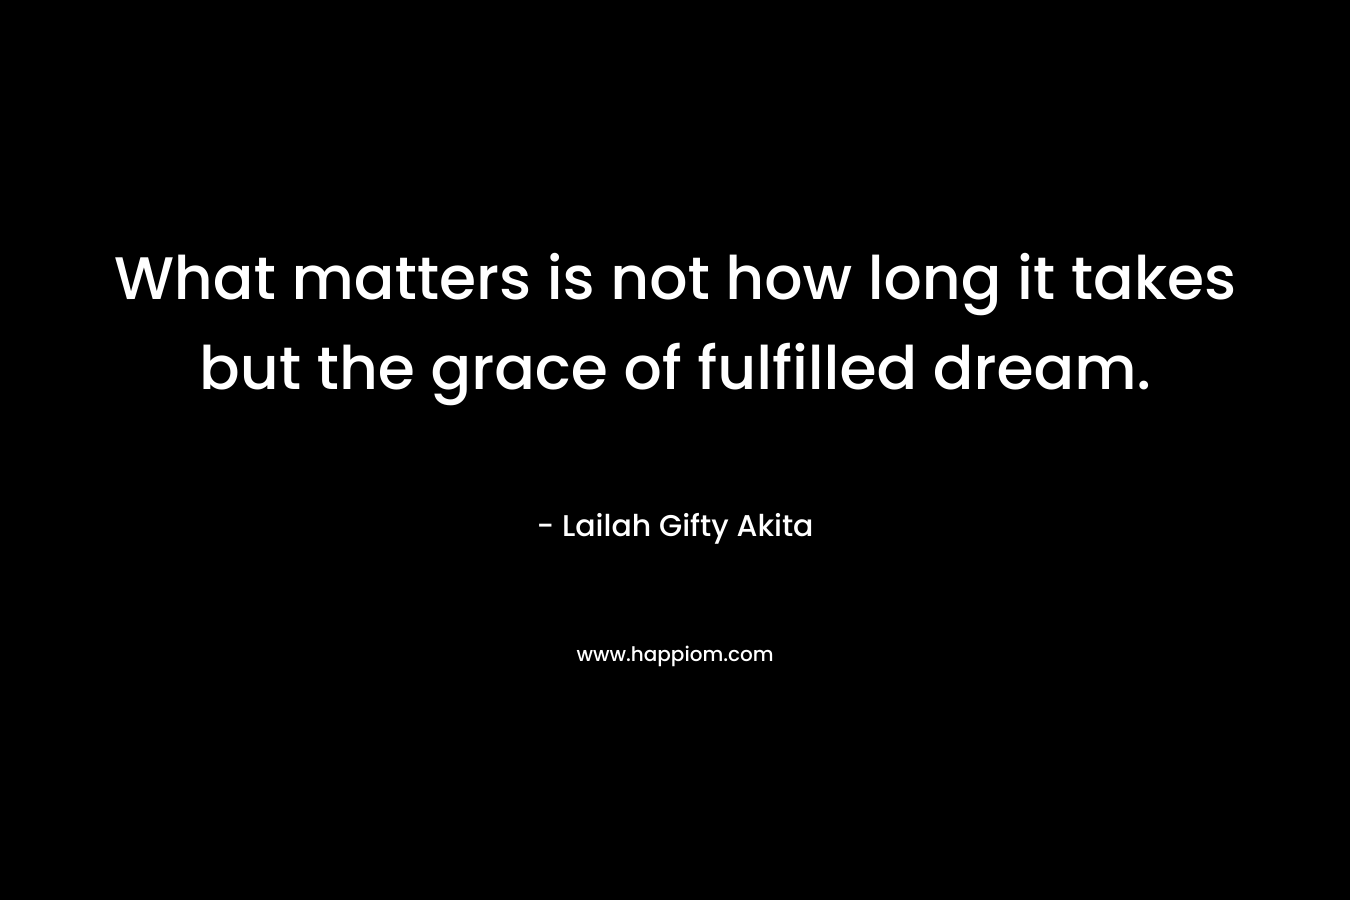 What matters is not how long it takes but the grace of fulfilled dream.